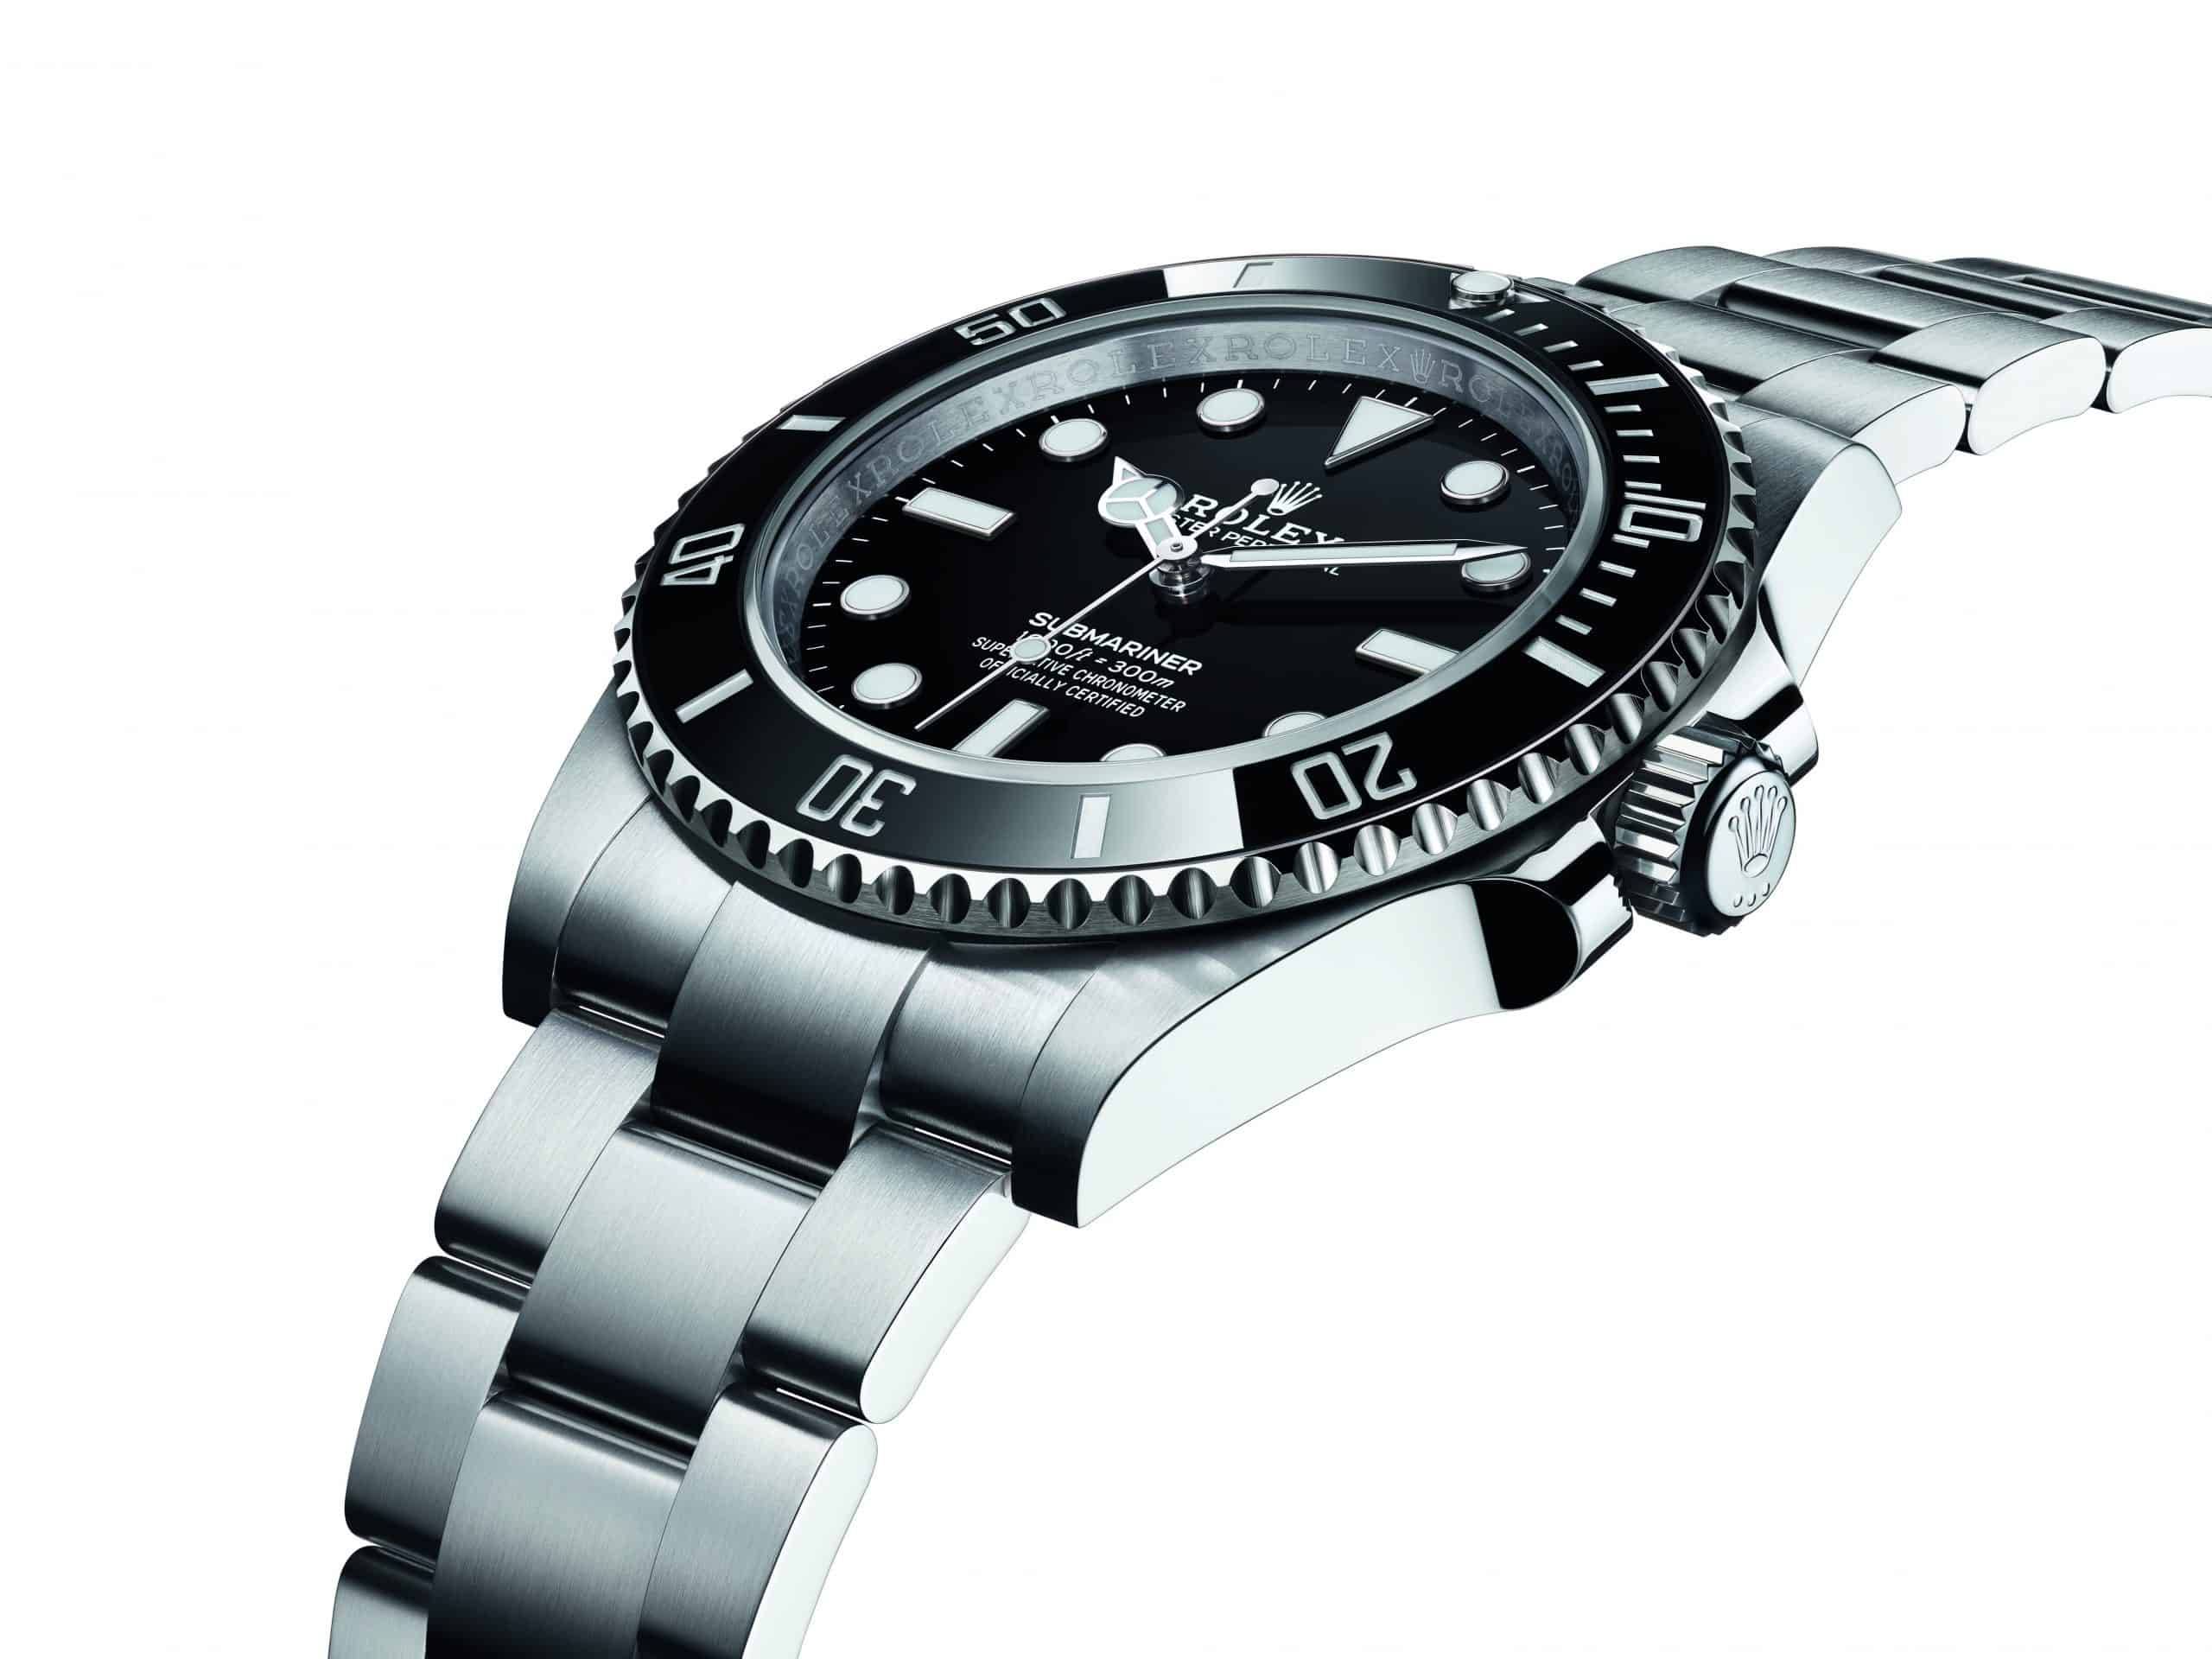 Rolex Submariner – introducing a new movement